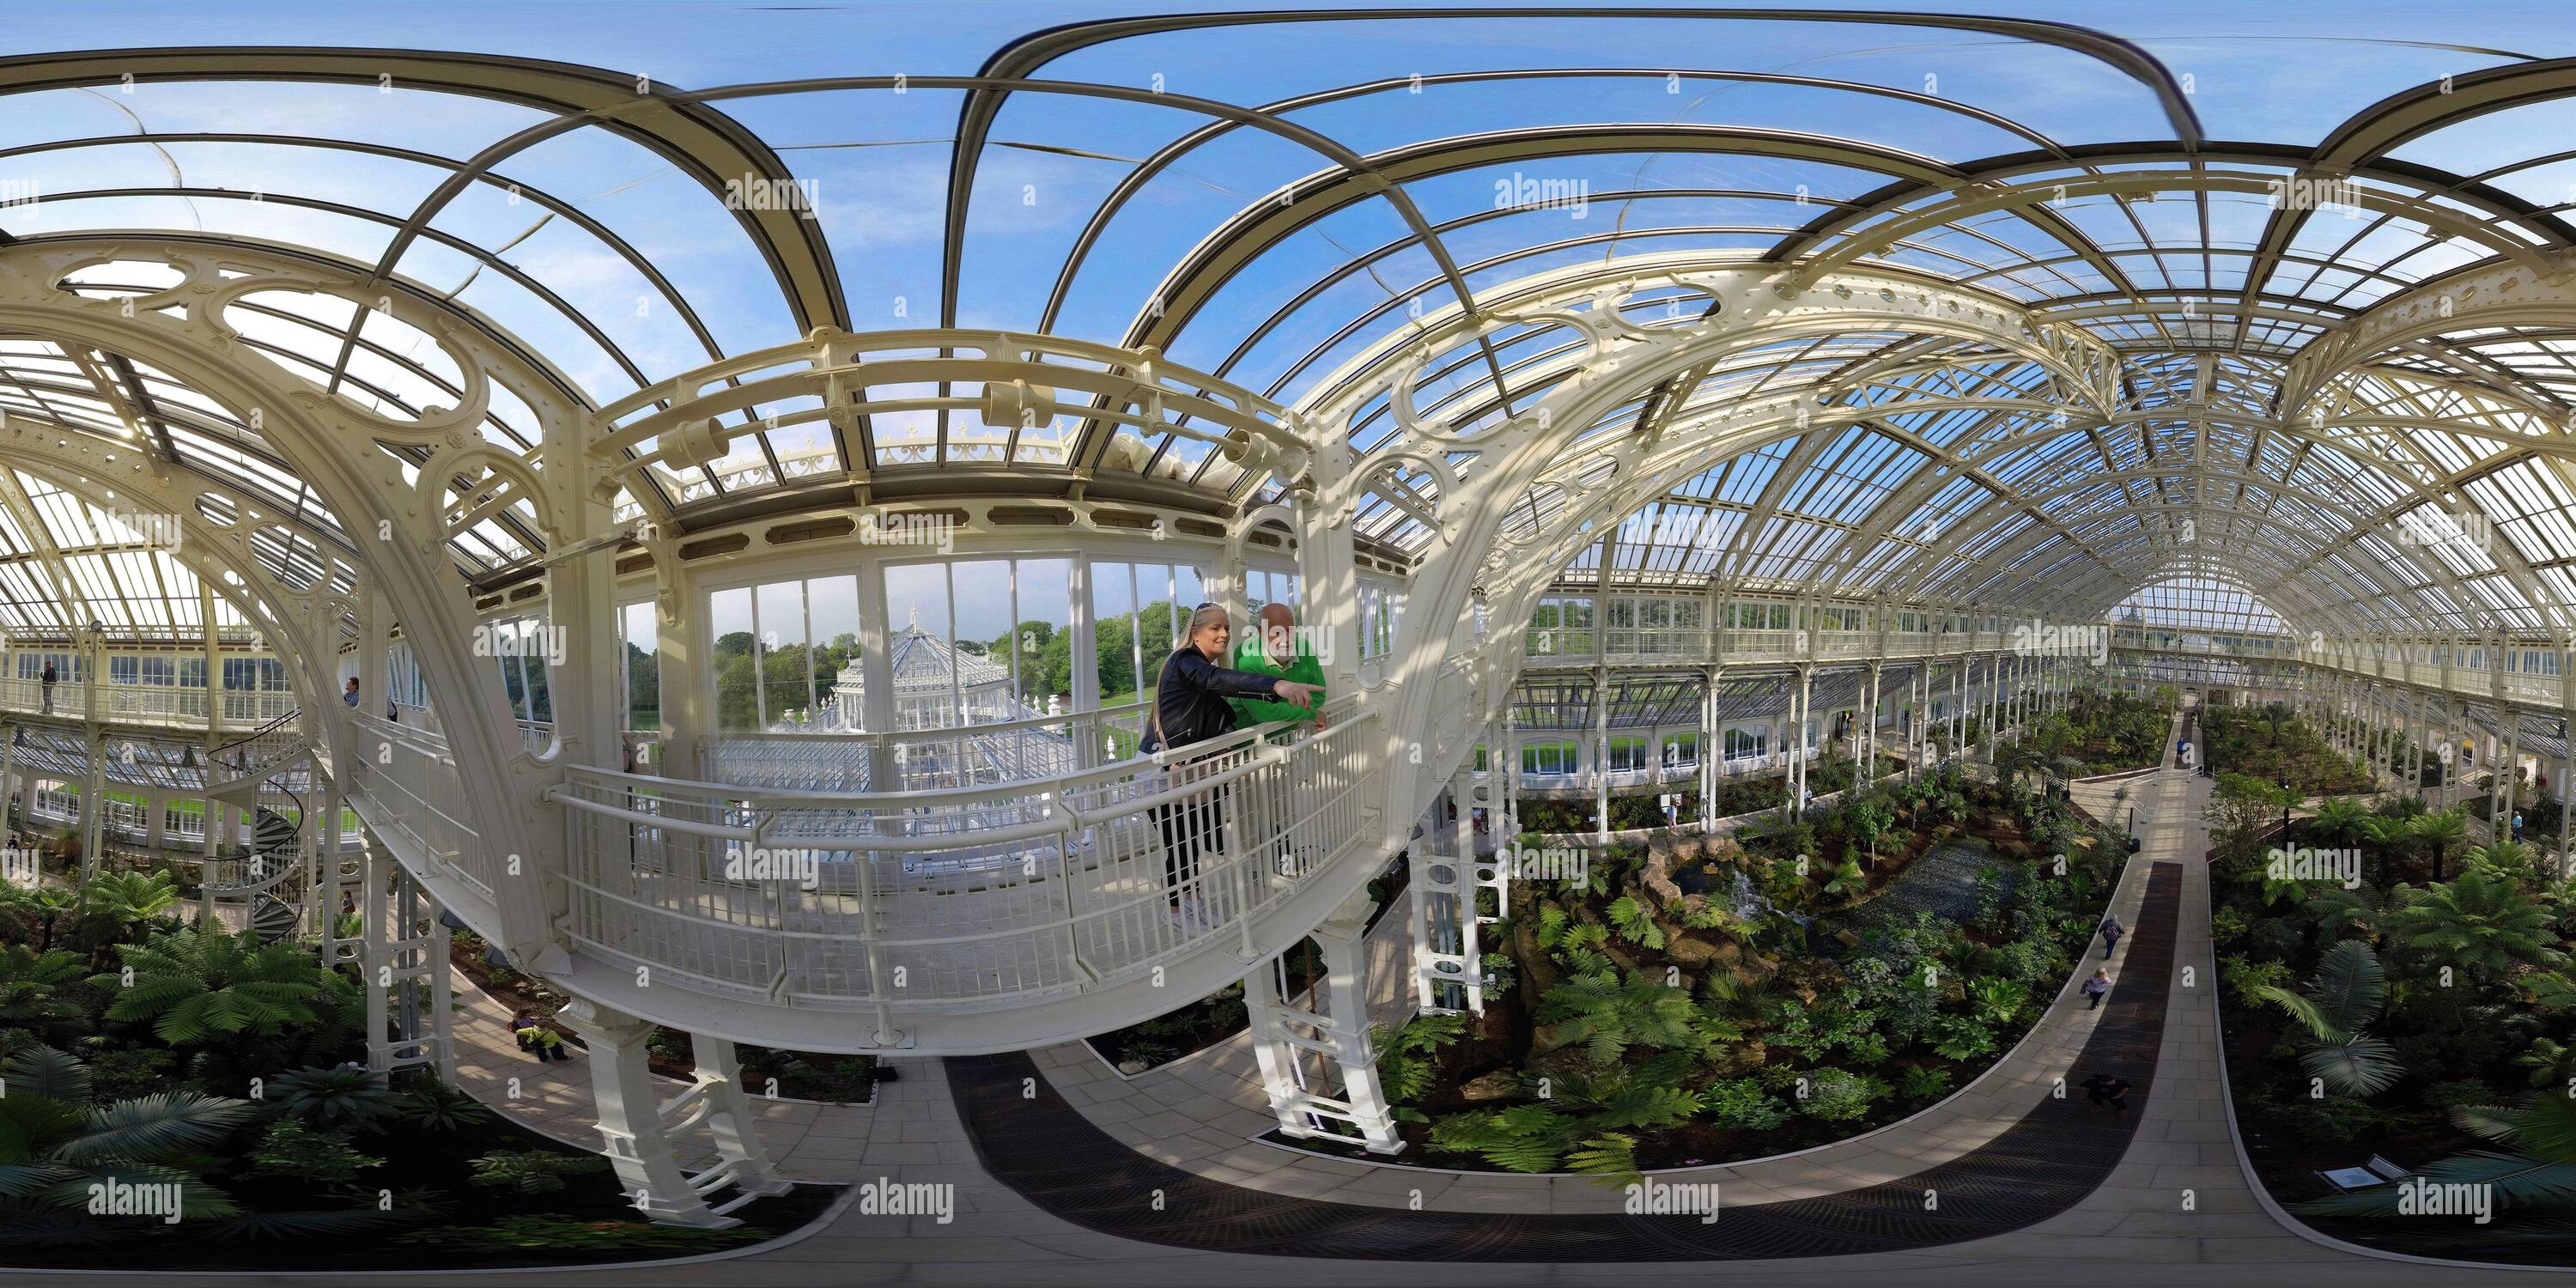 360 degree panoramic view of Take a look around the largest Victorian Glasshouse in the world, the Temperate House at Kew Gardens.   PICTURE CREDIT : © MARK PAIN / ALAMY